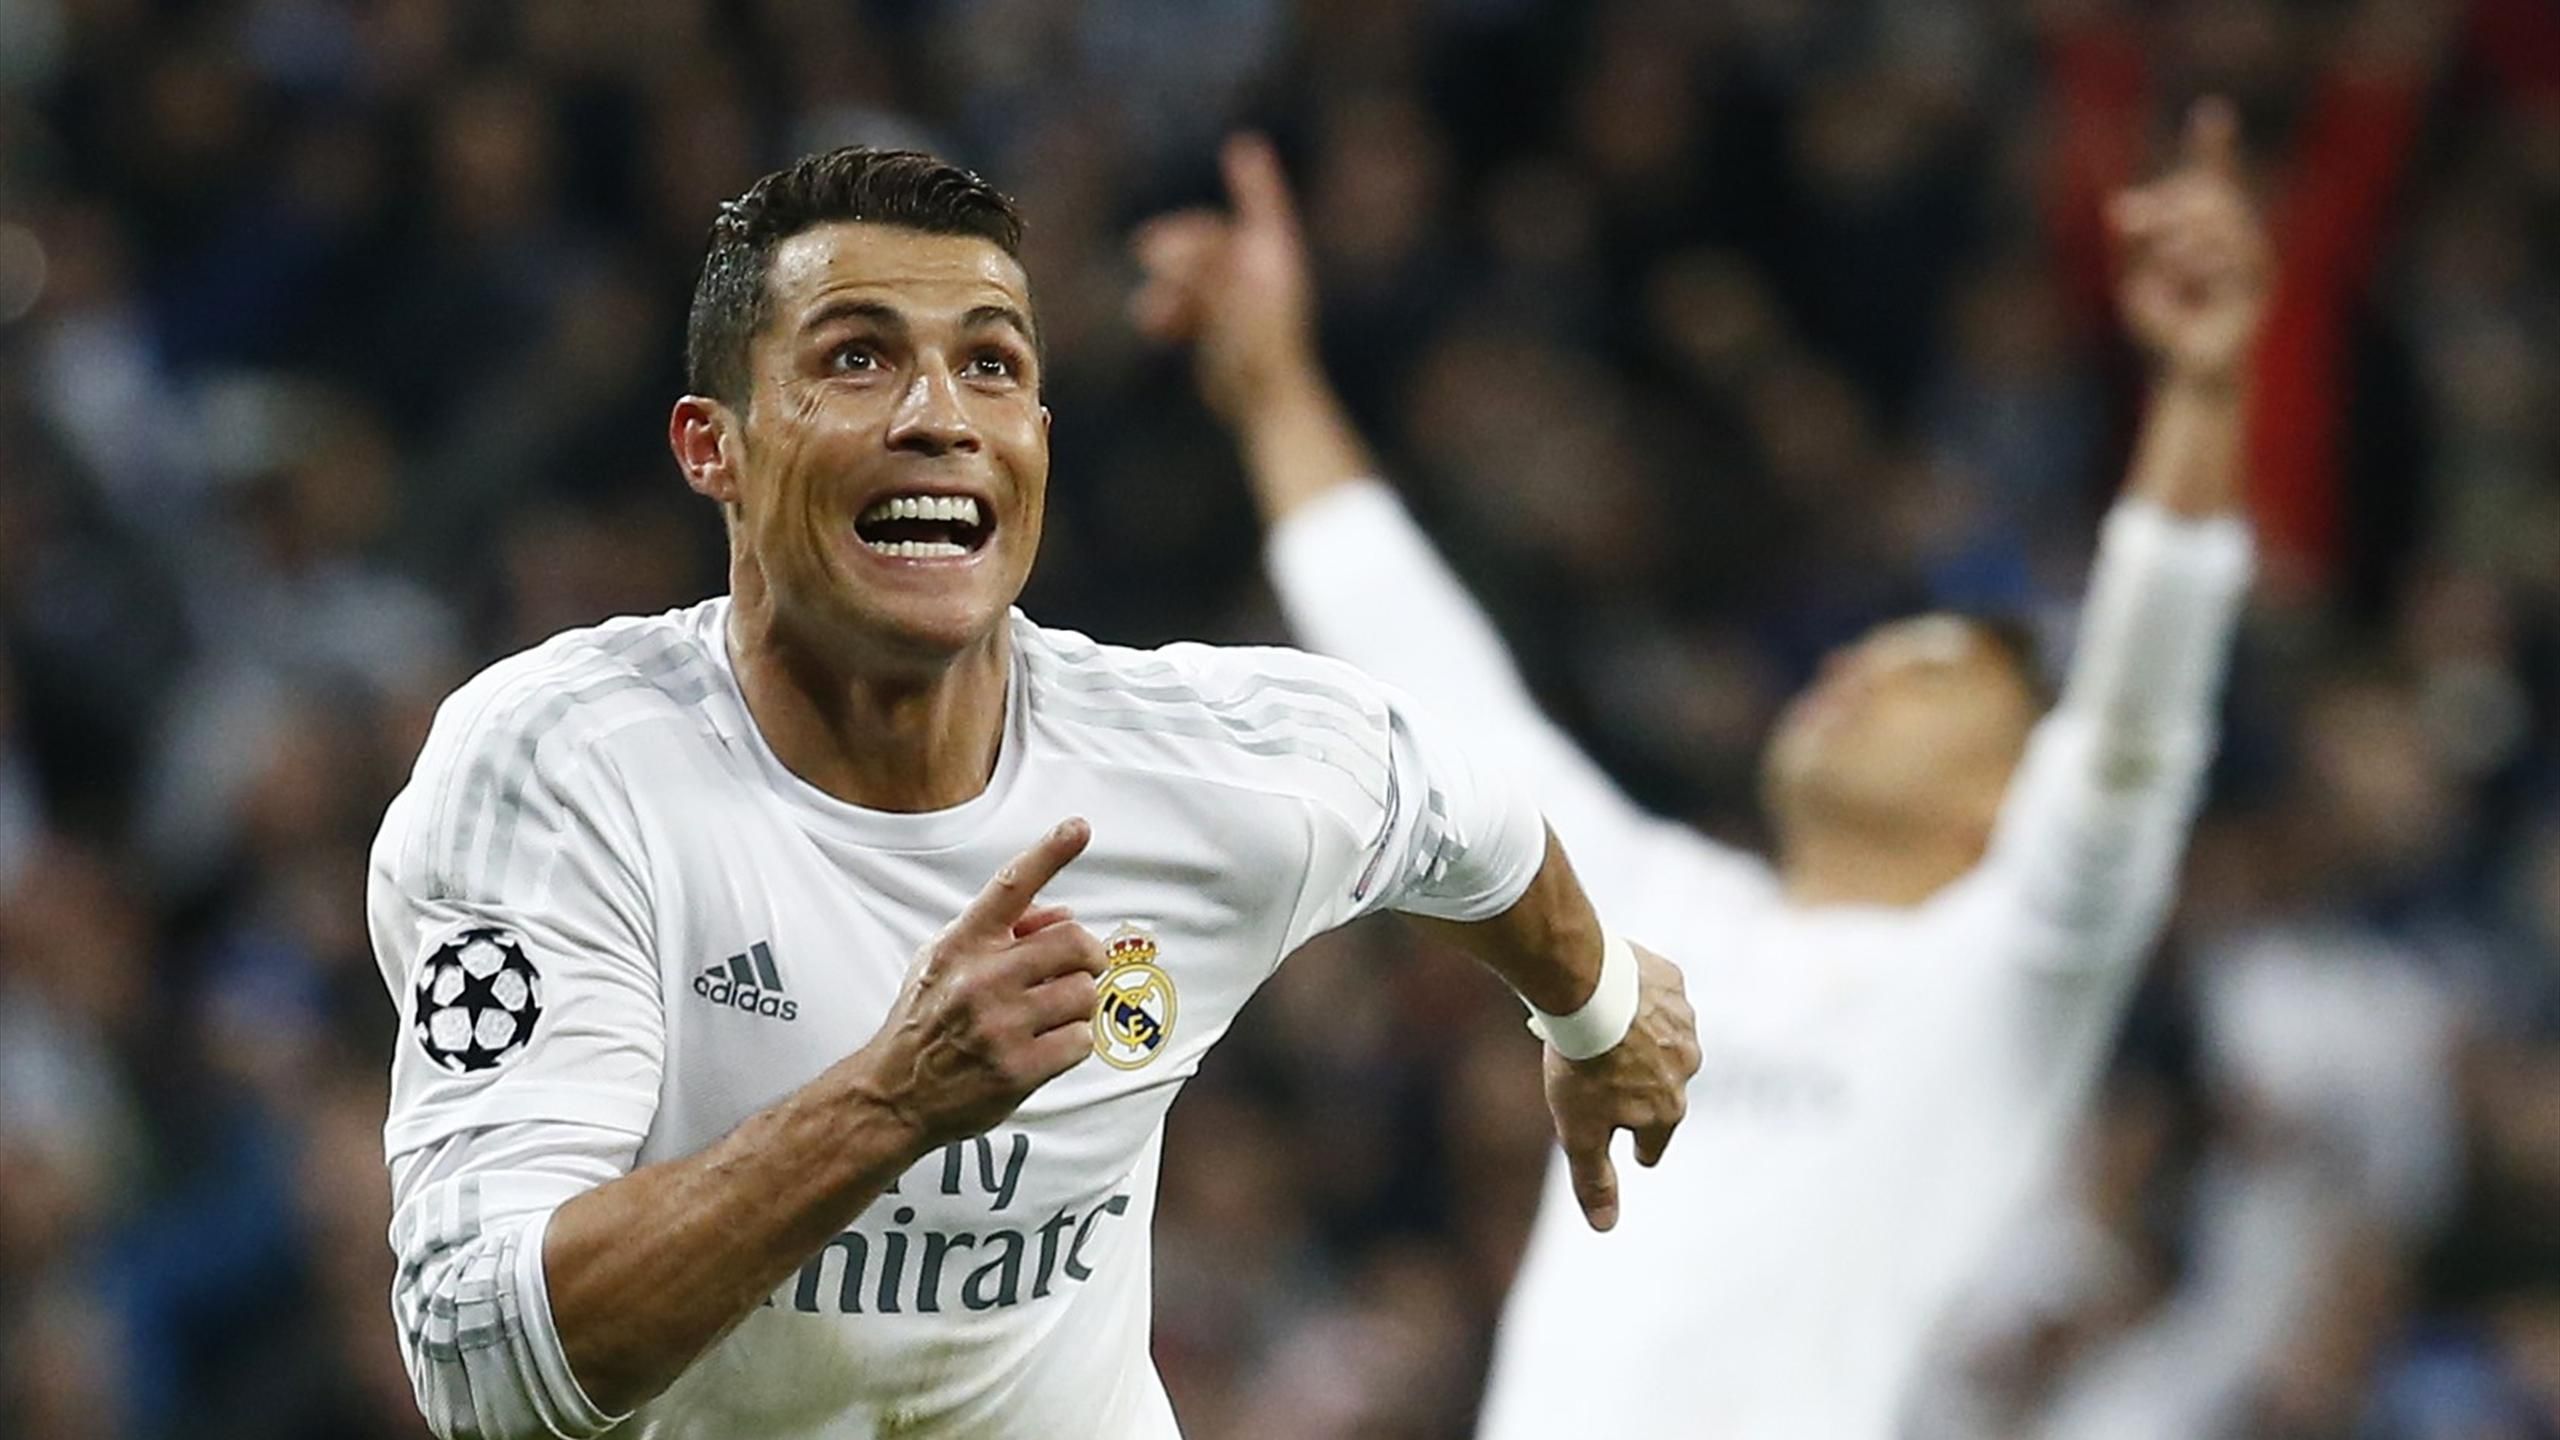 GIF: Cristiano Ronaldo Hat-Trick Leads Real Madrid Against Real Sociedad, News, Scores, Highlights, Stats, and Rumors